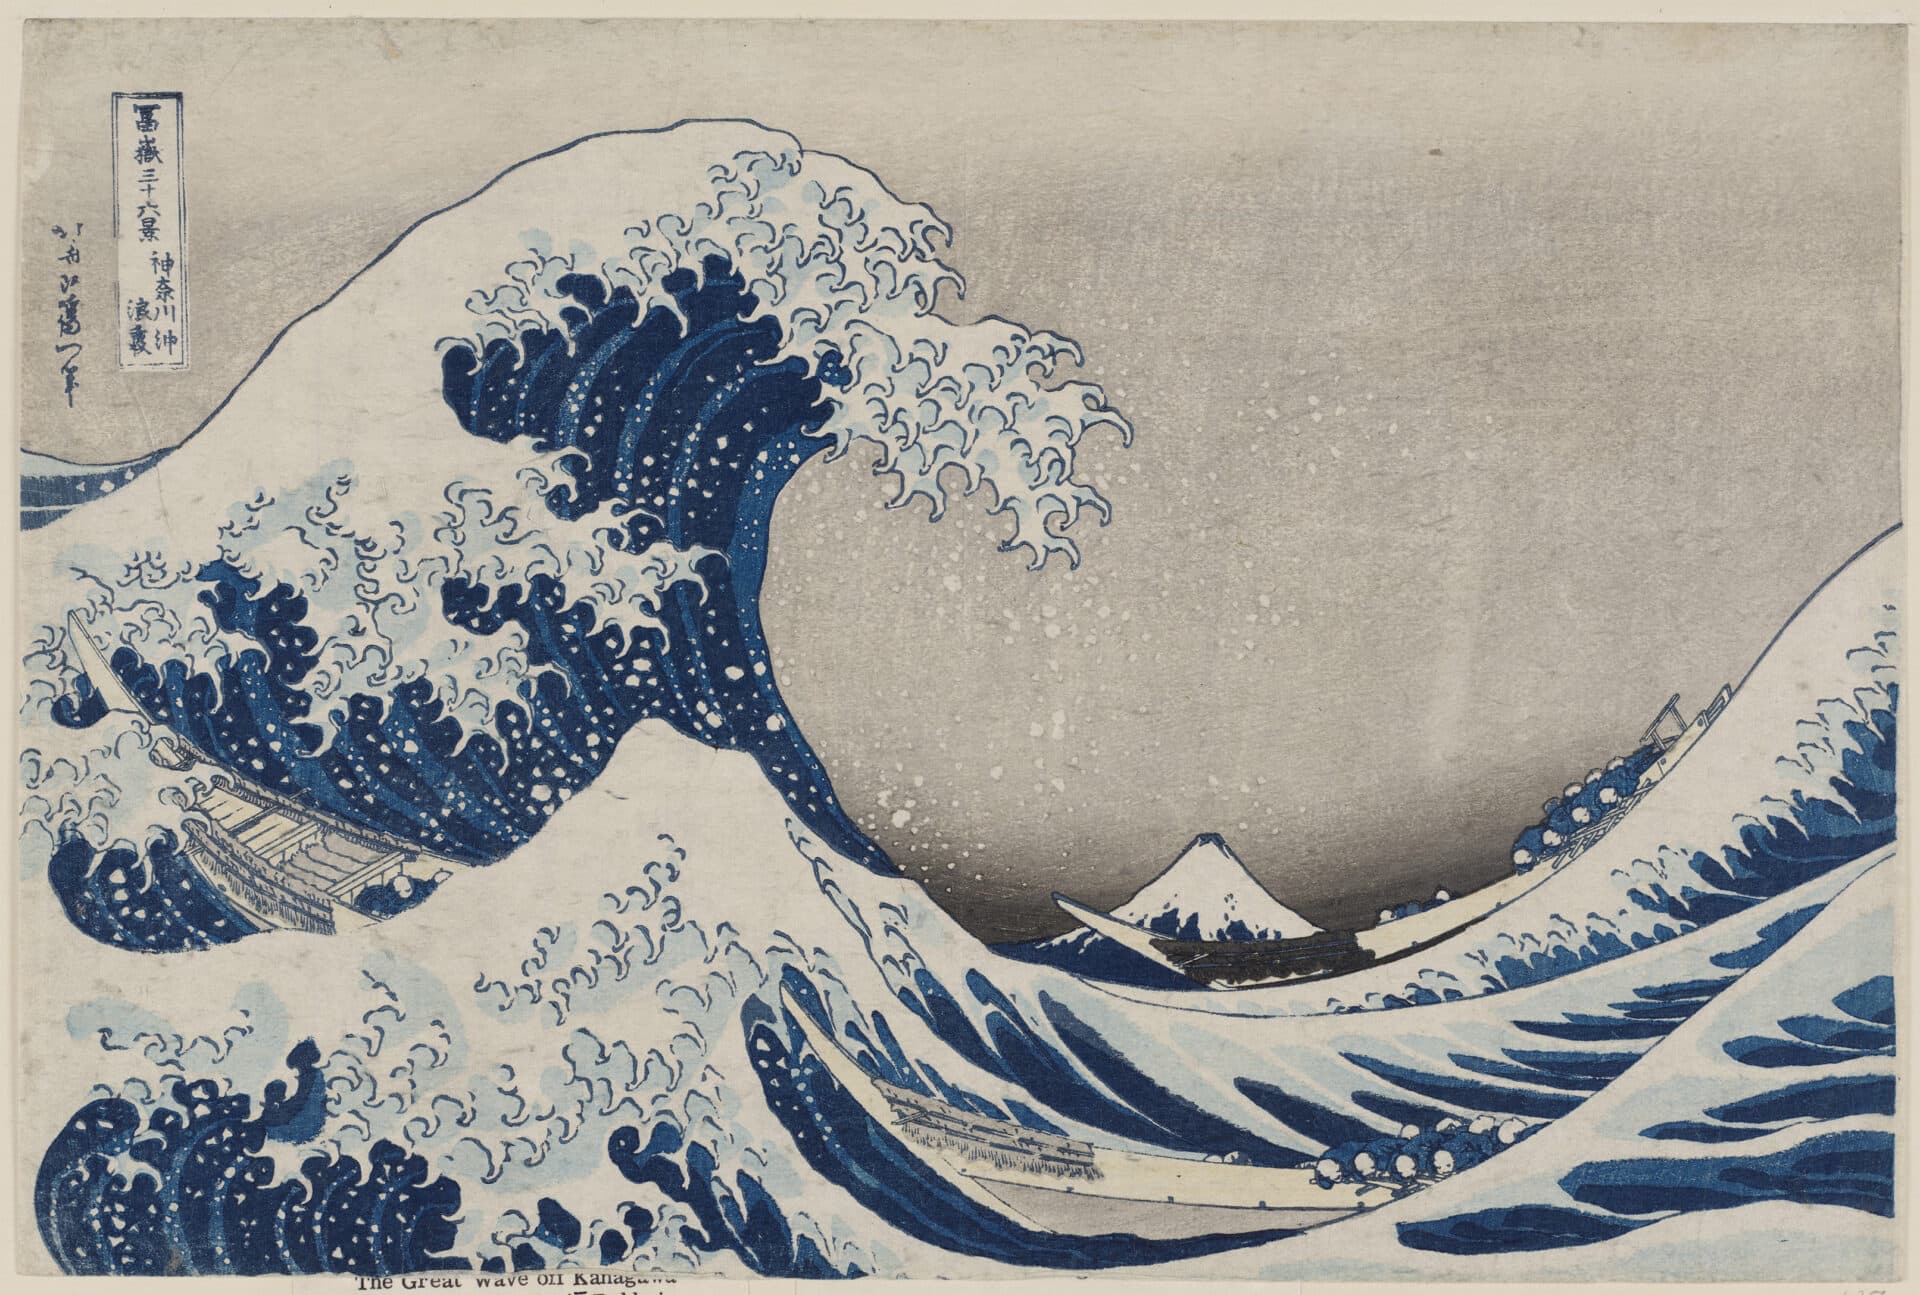 Katsushika Hokusai, &quot;Under the Wave off Kanagawa&quot; (Kanagawa-oki nami-ura), also known as the &quot;Great Wave,&quot; from the series &quot;Thirty-six Views of Mount Fuji&quot; (Fugaku sanjūrokkei). (Courtesy William Sturgis Bigelow Collection/Museum of Fine Arts, Boston)